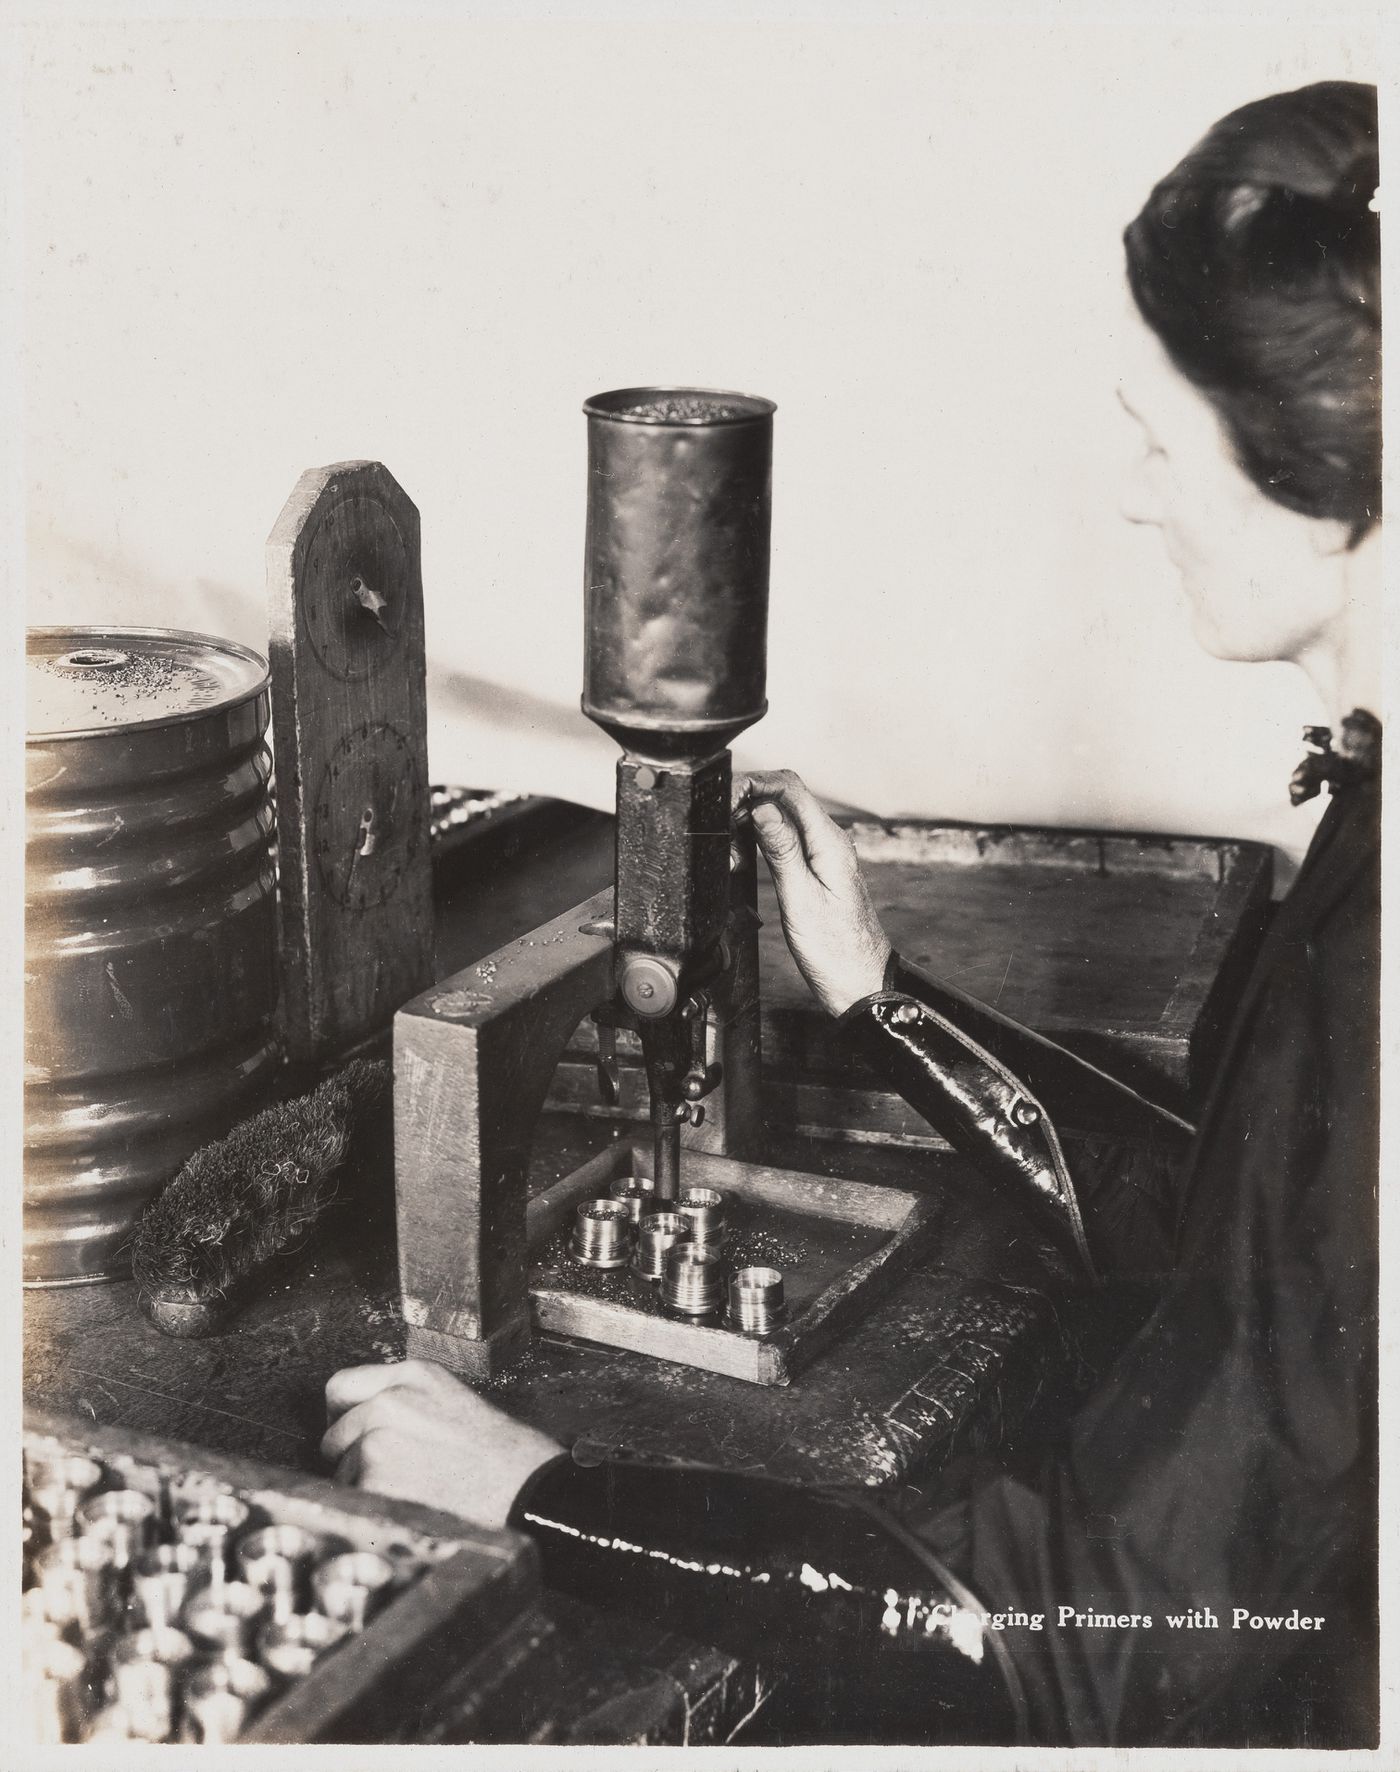 Interior view of worker charging primers with powder at the Energite Explosives Plant No. 3, the Shell Loading Plant, Renfrew, Ontario, Canada